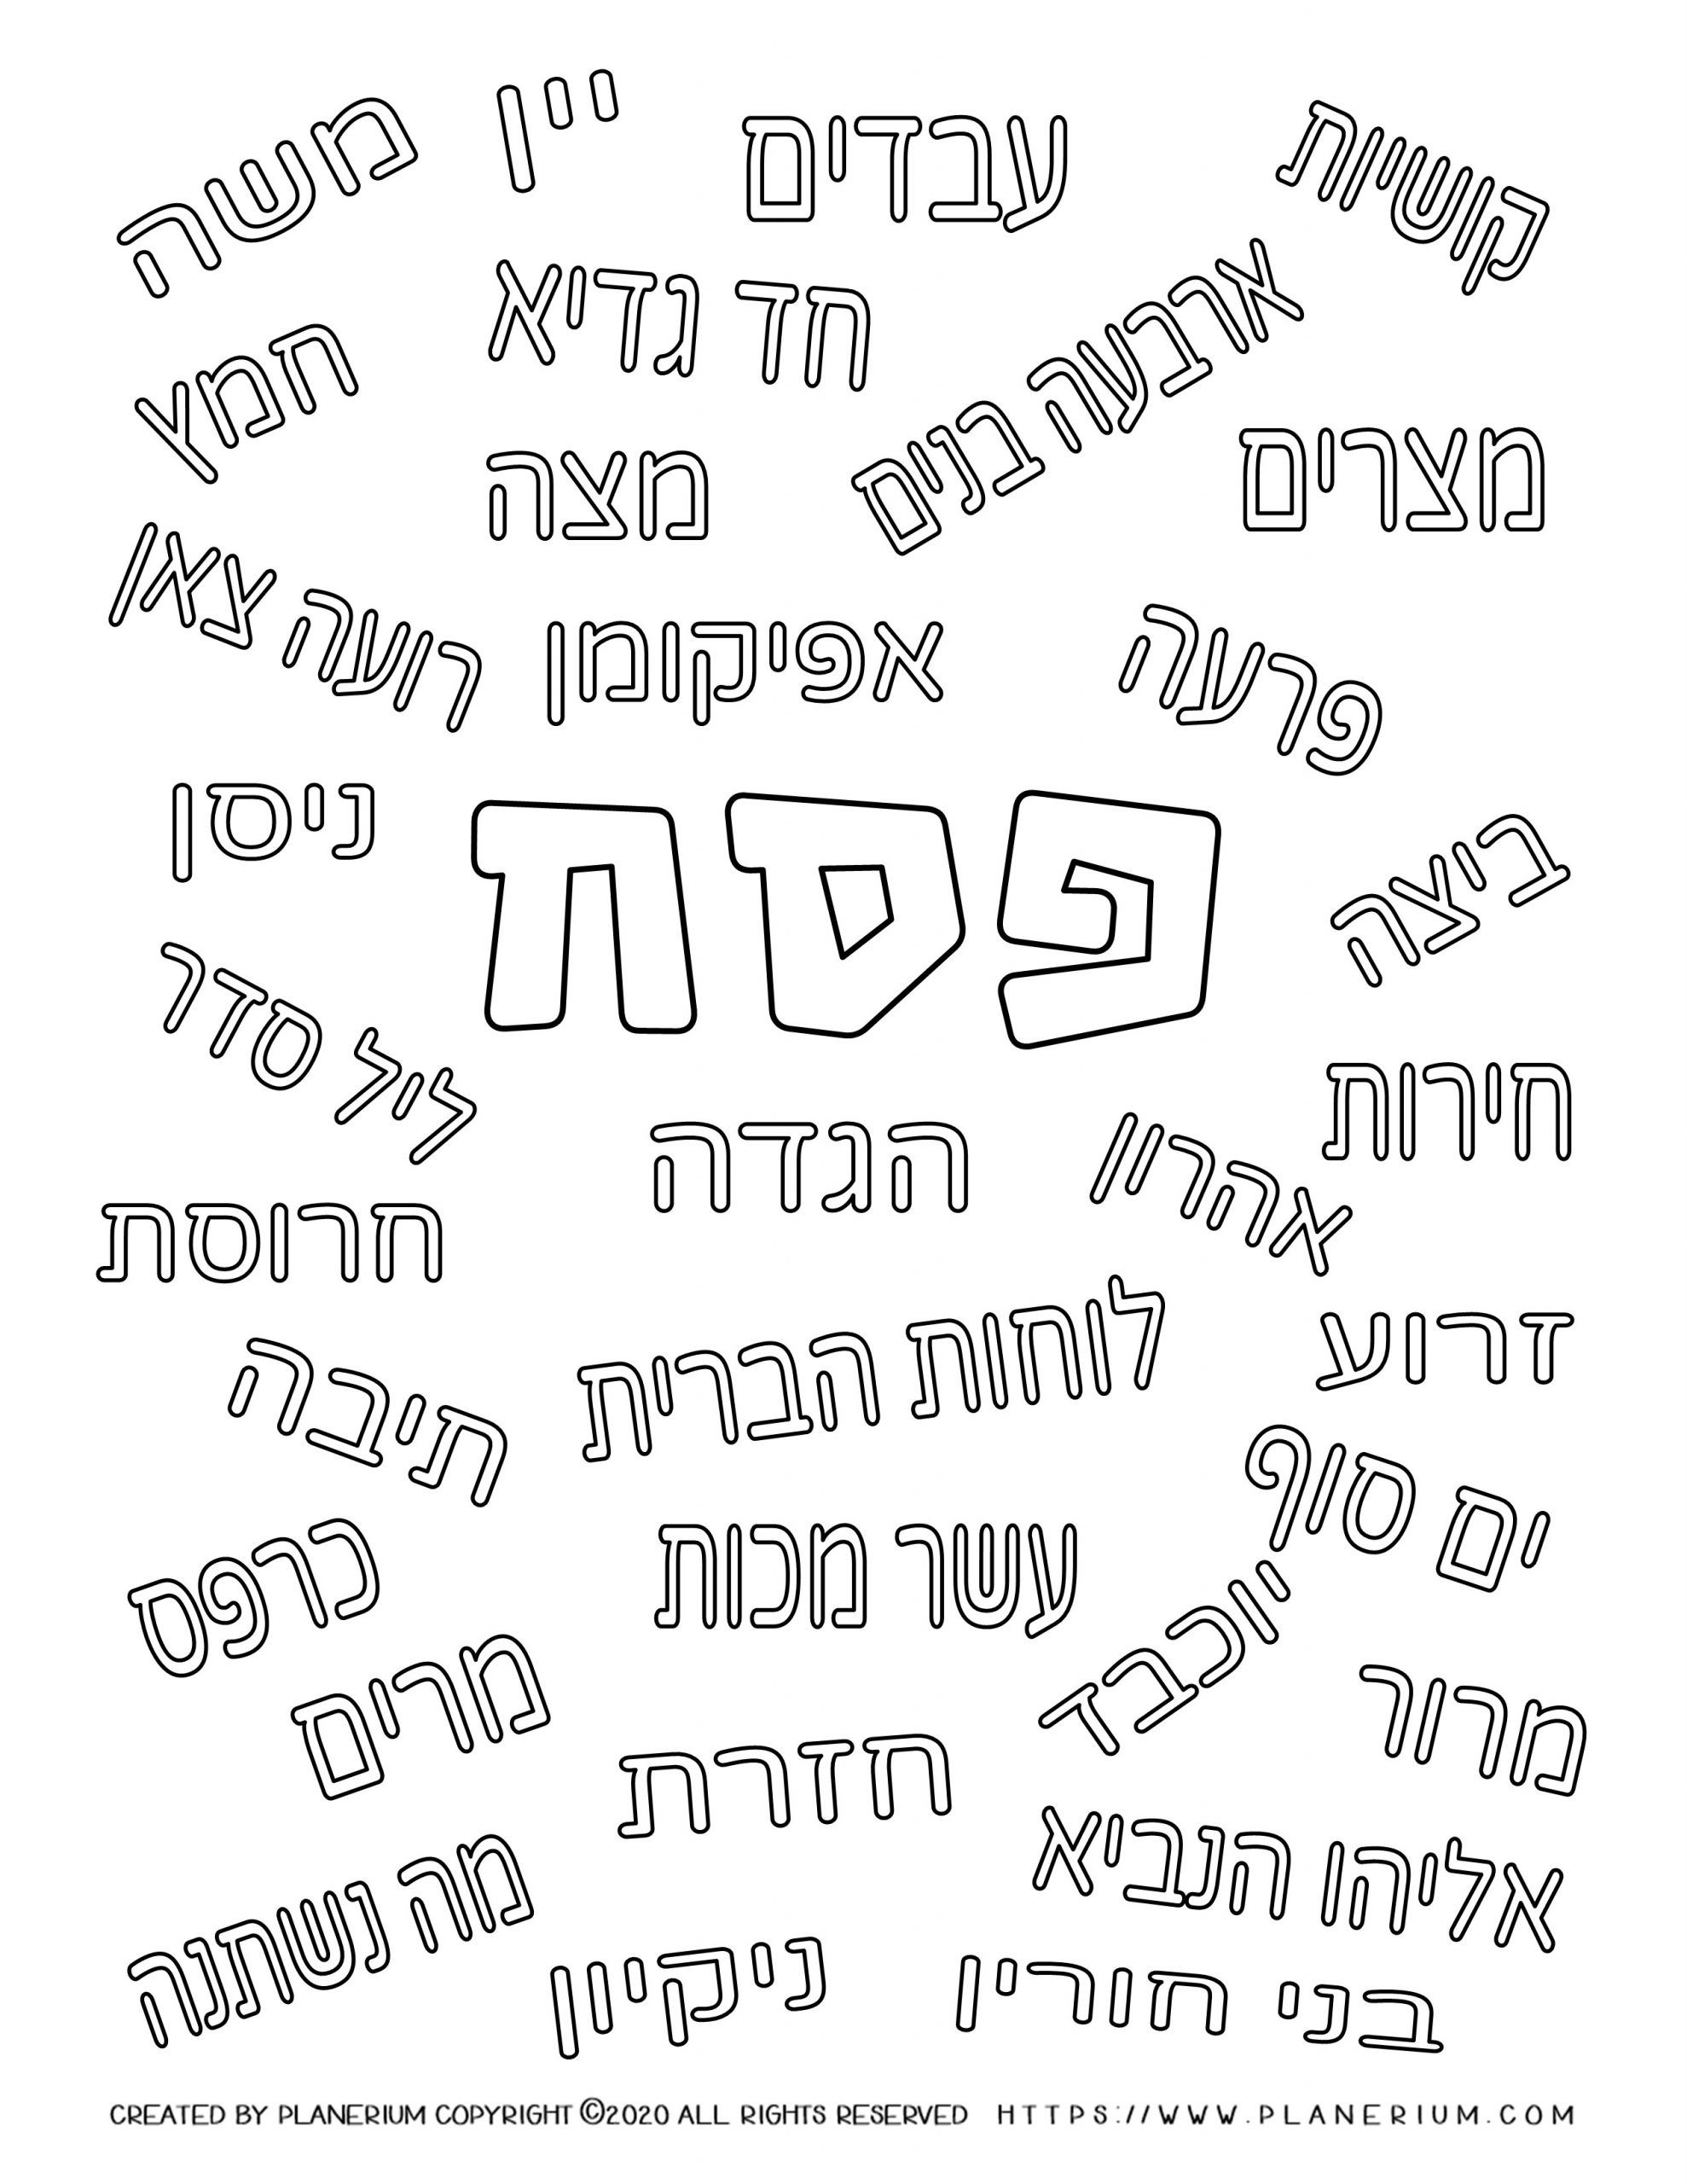 Passover Coloring Page Related Words in Hebrew Planerium